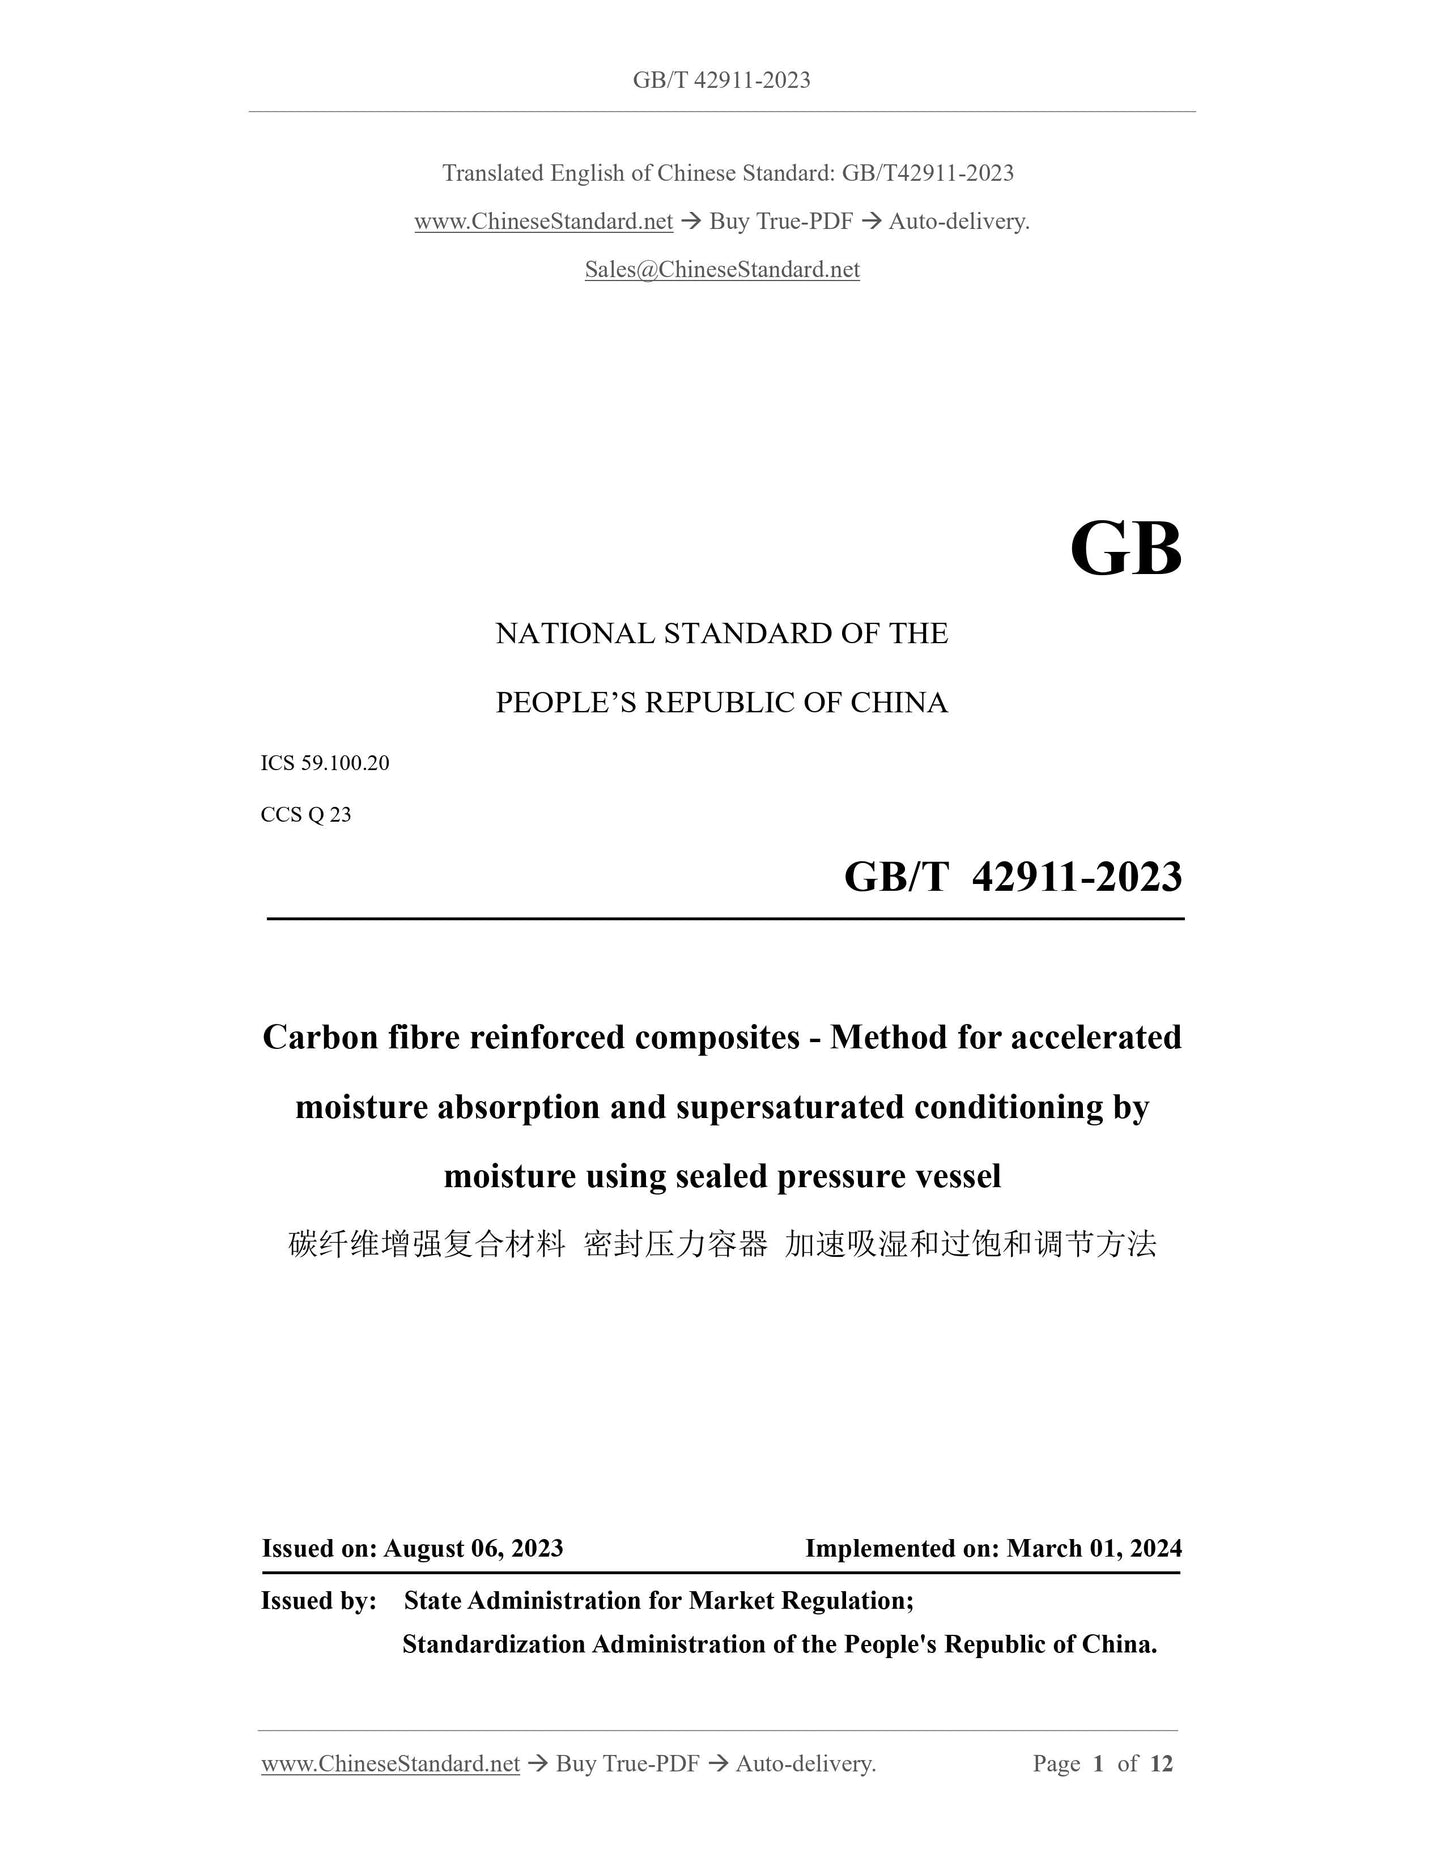 GB/T 42911-2023 Page 1